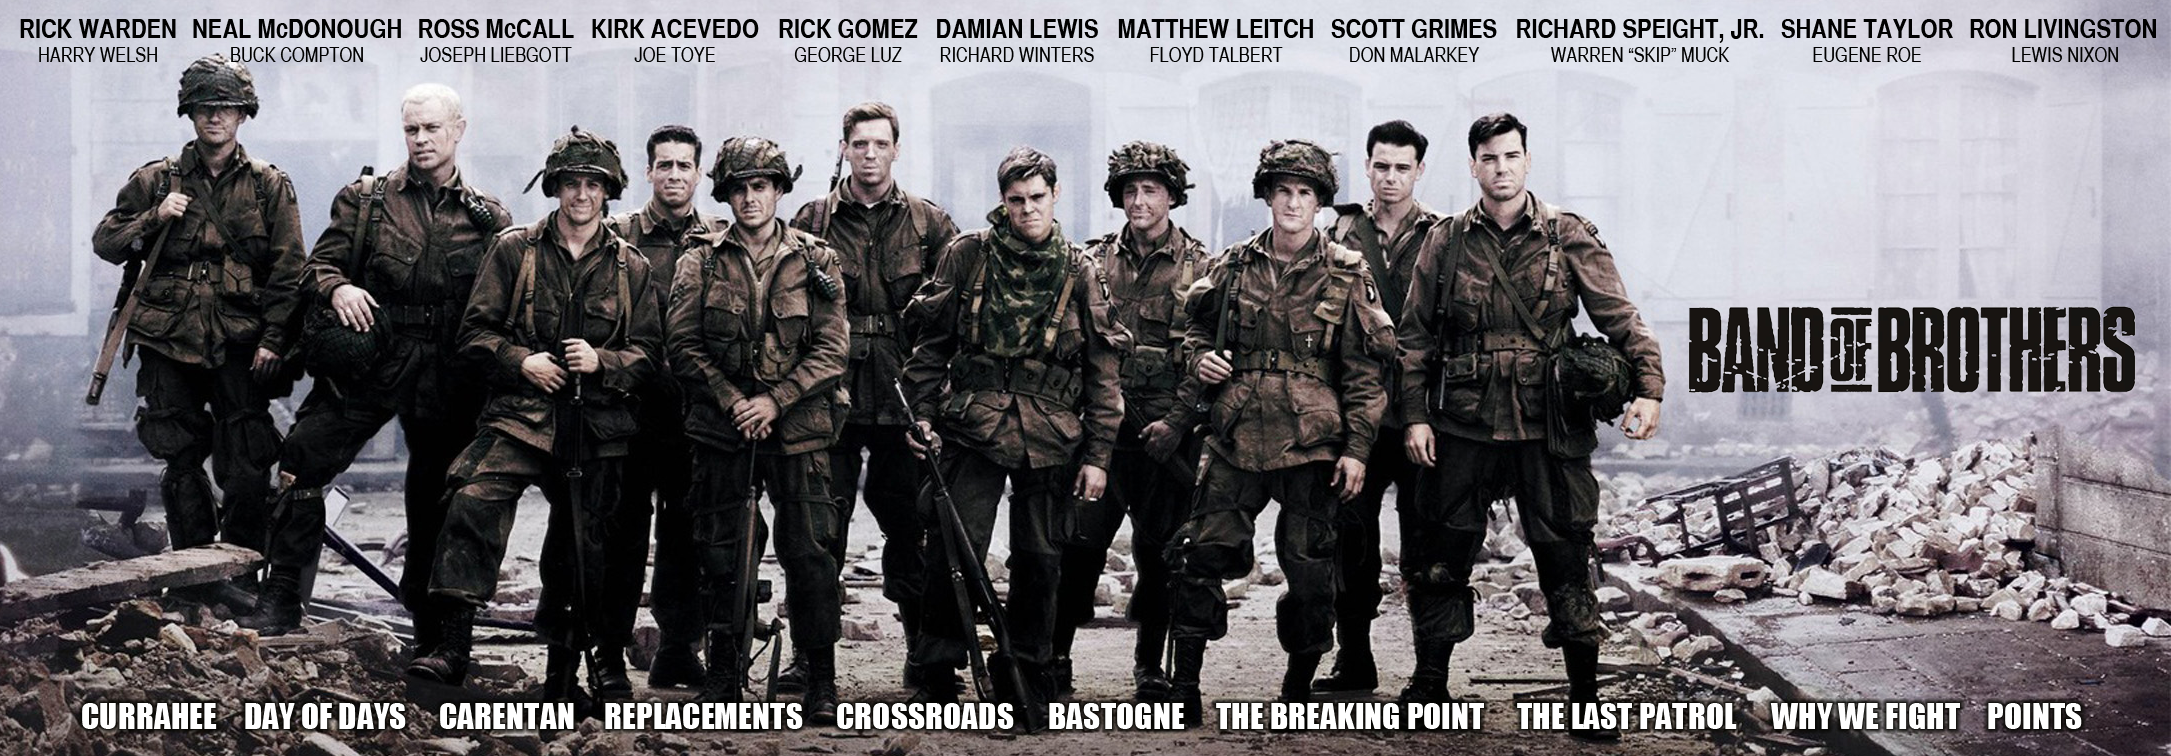 band_of_brothers_banner_by_social_iconoclast-d5gthsa.png